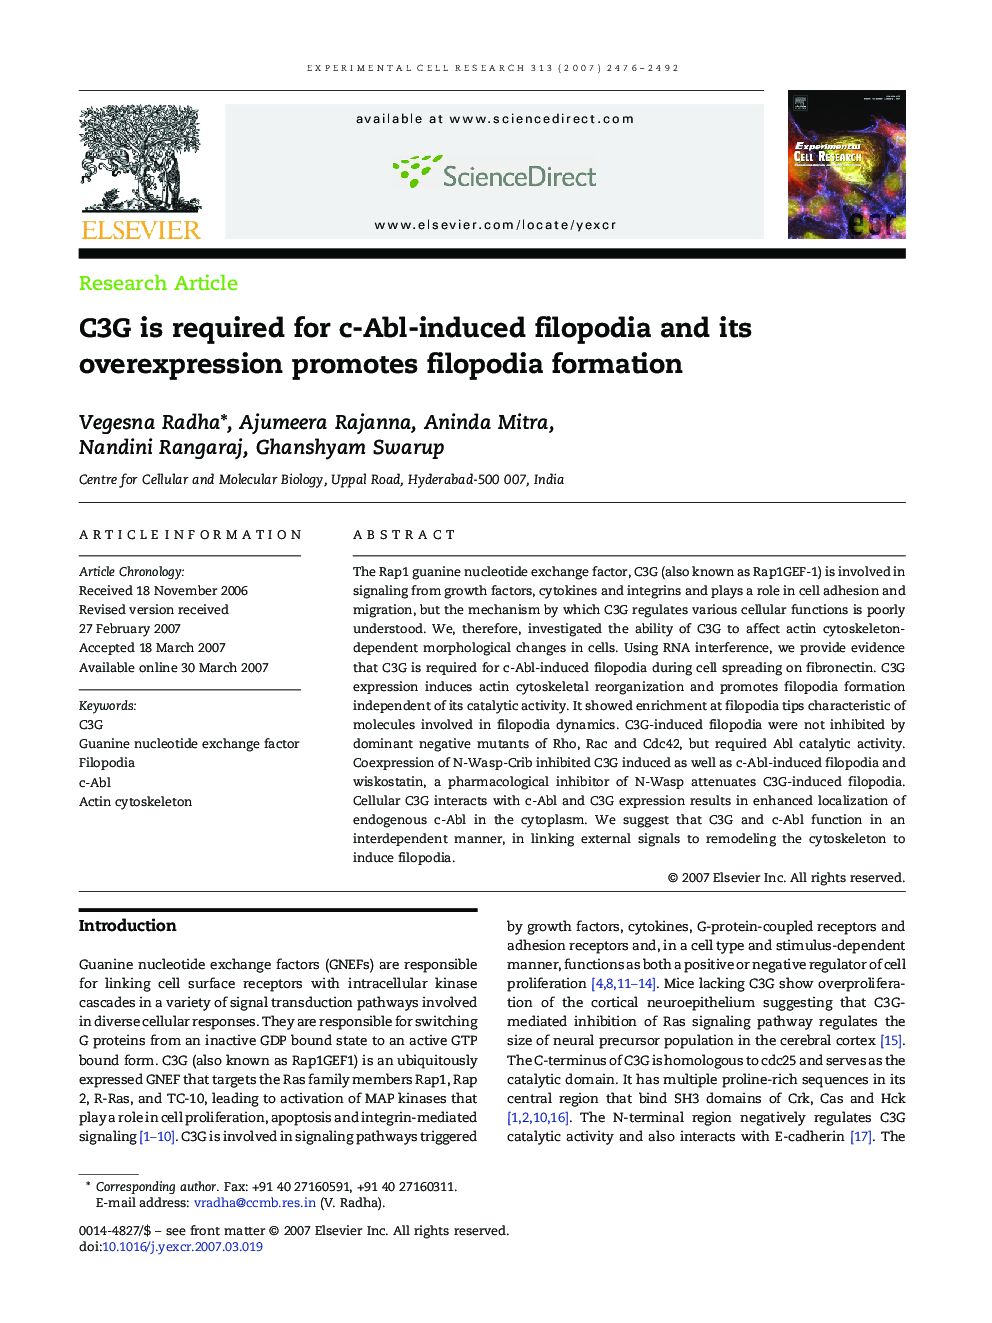 C3G is required for c-Abl-induced filopodia and its overexpression promotes filopodia formation